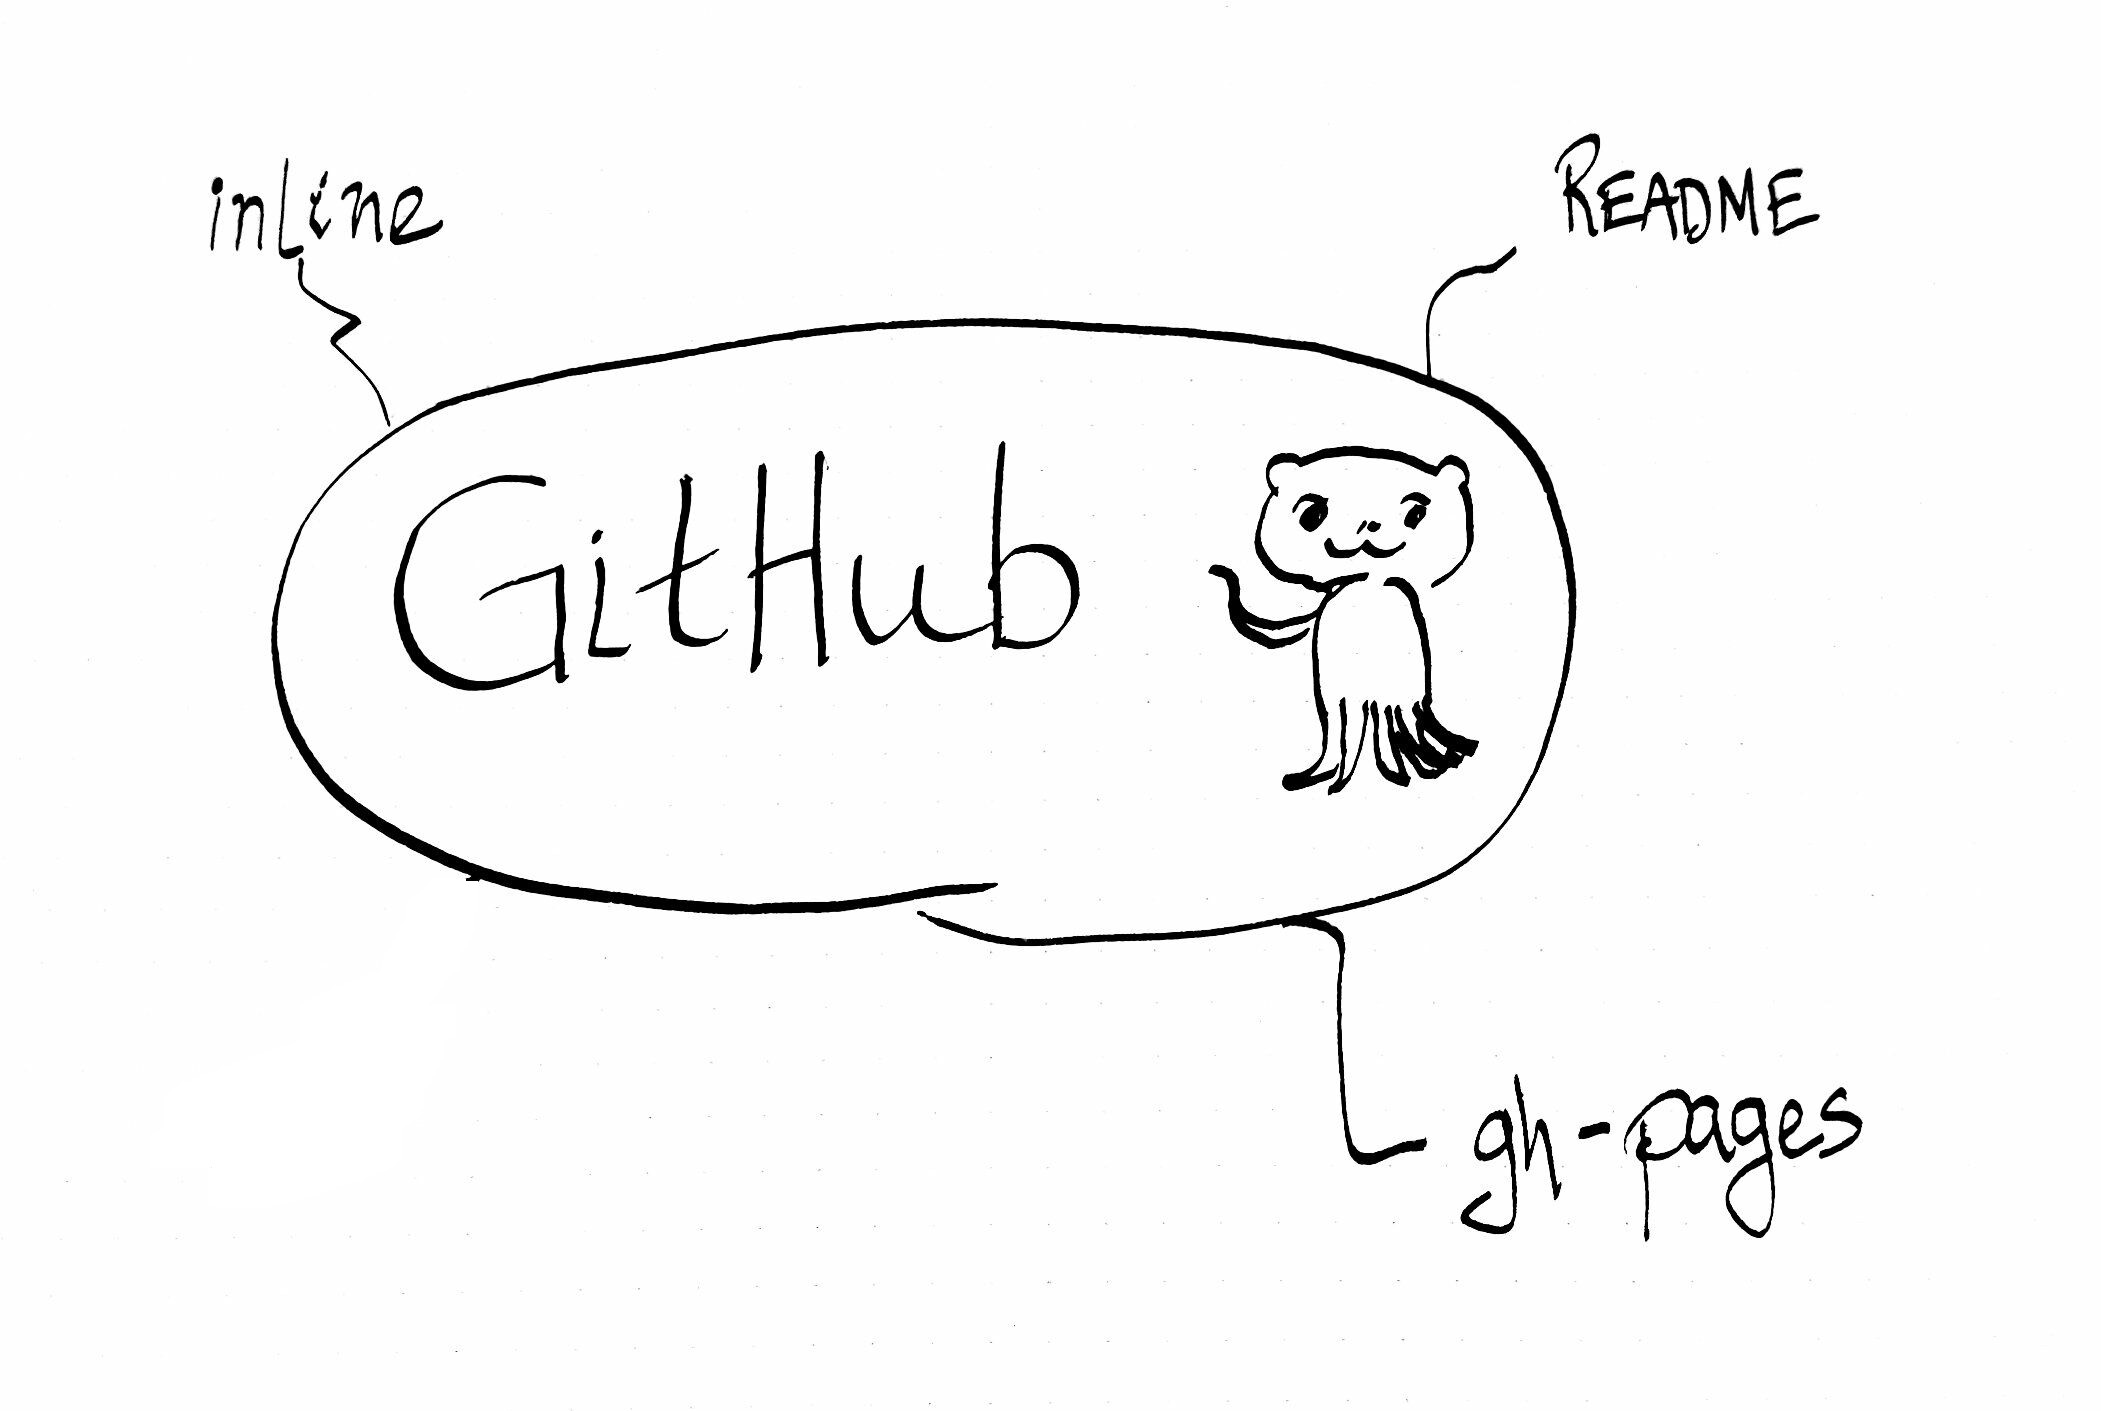 04-23-github-gh-pages.md